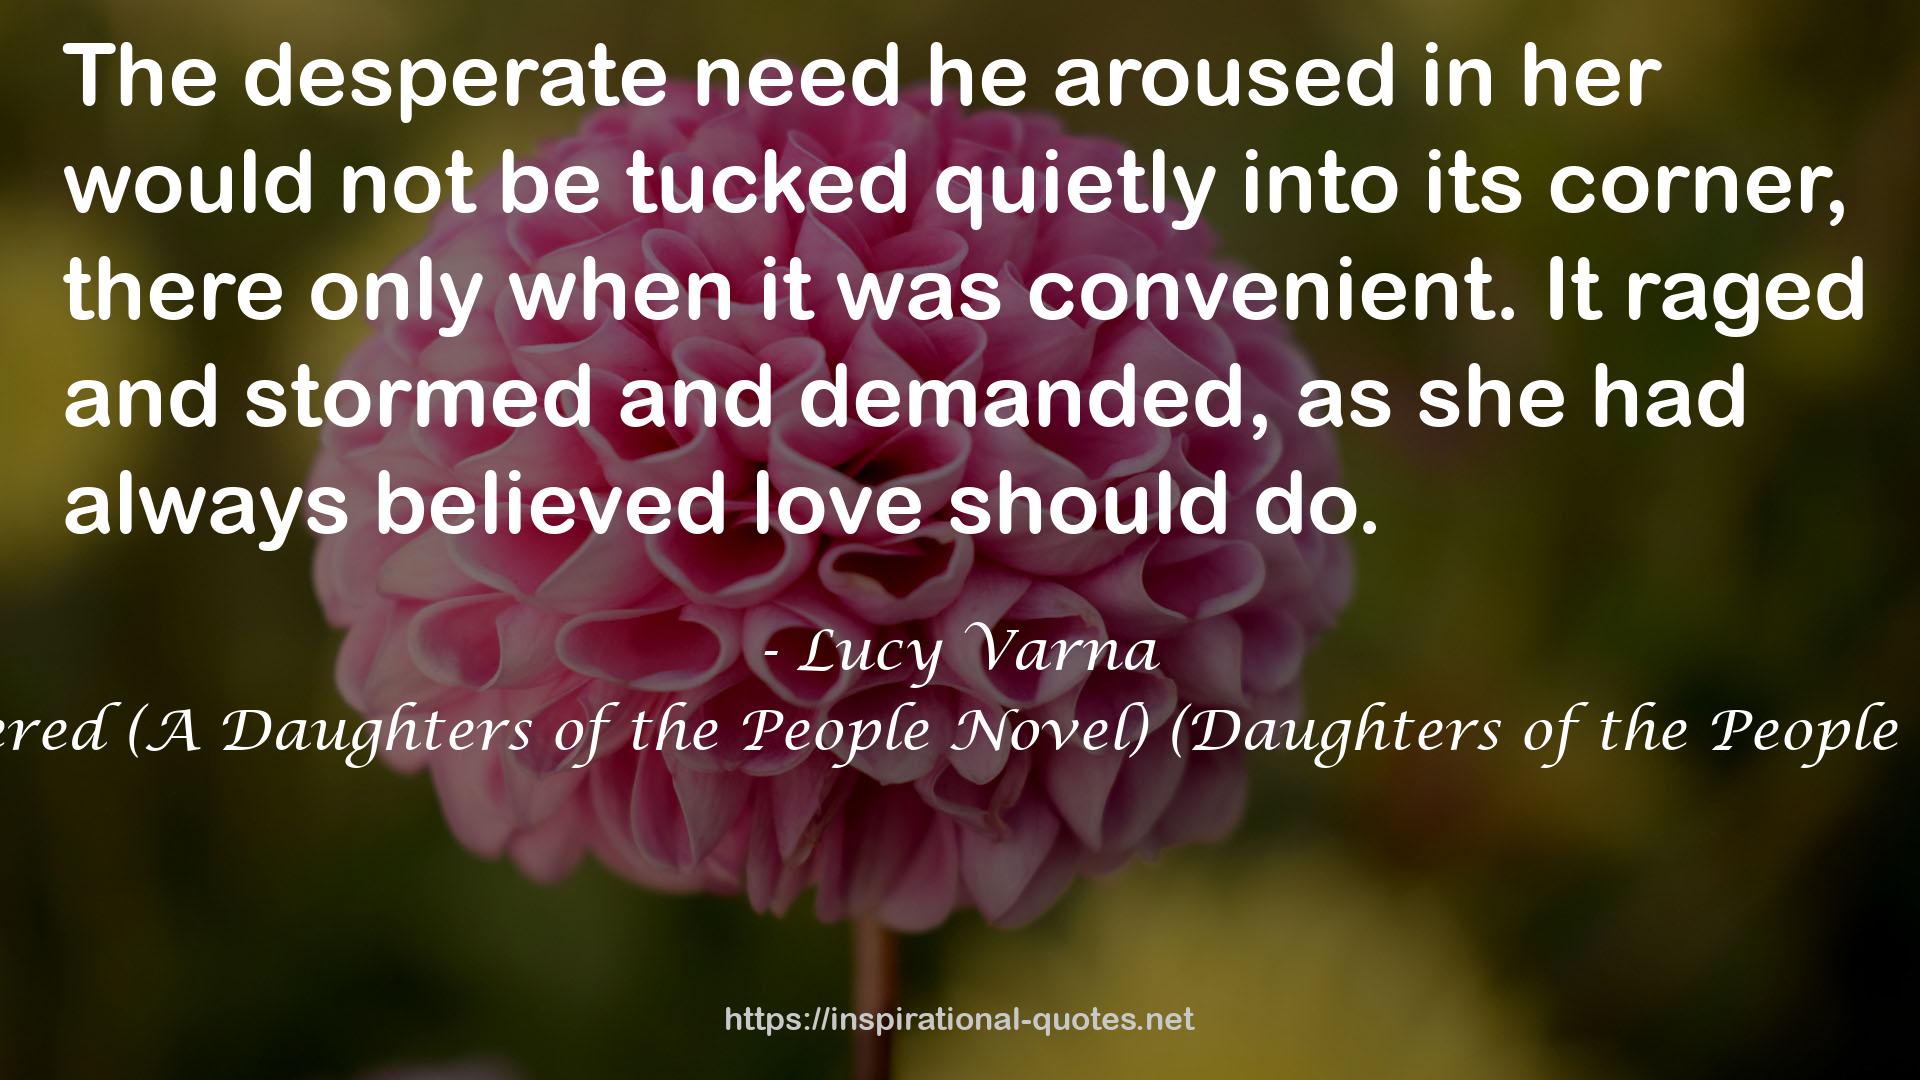 Lucy Varna QUOTES